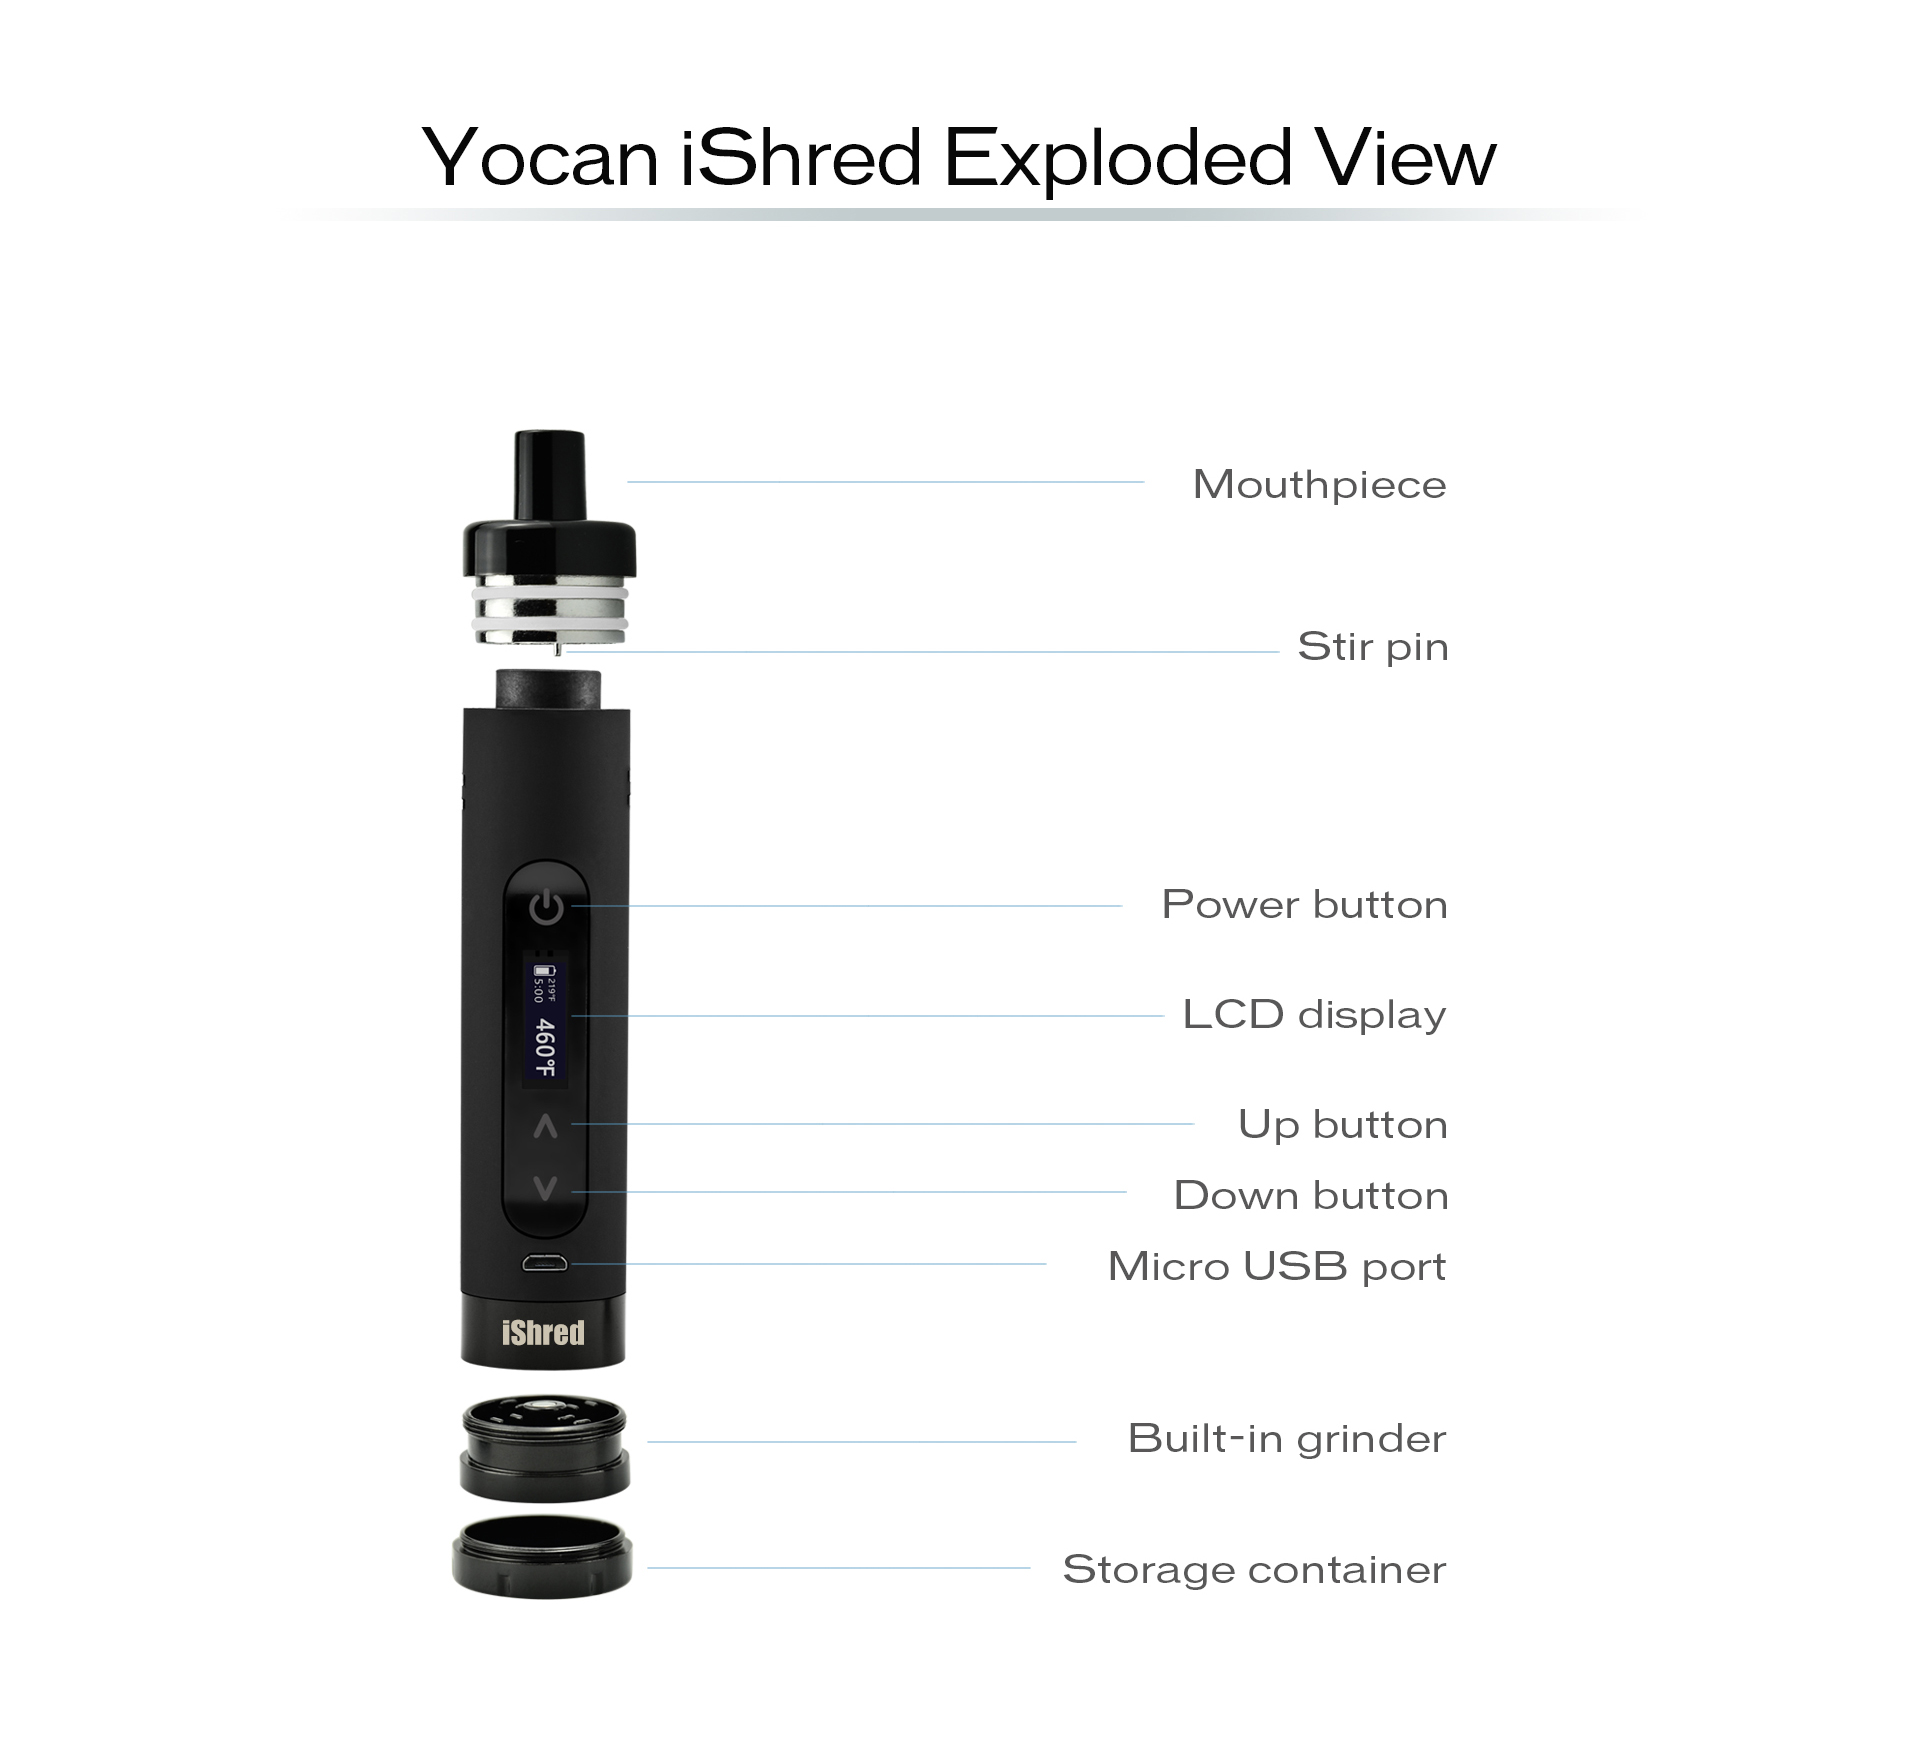 Yocan iShred Exploded View